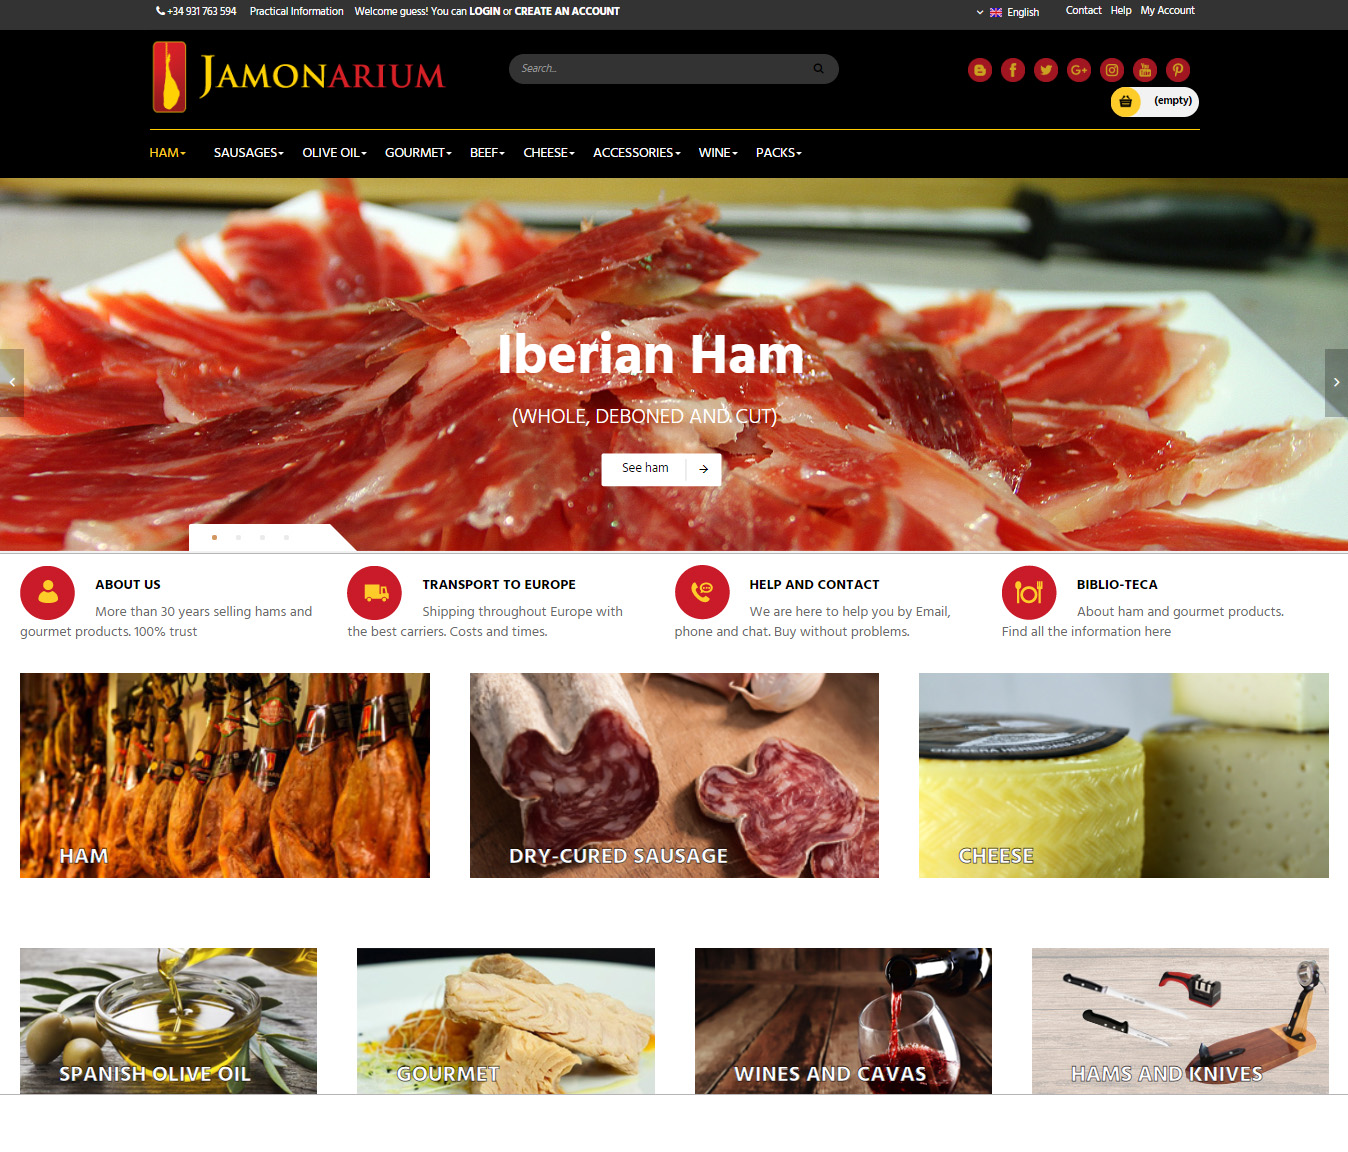 We improve our online store selling hams and Iberian sausages